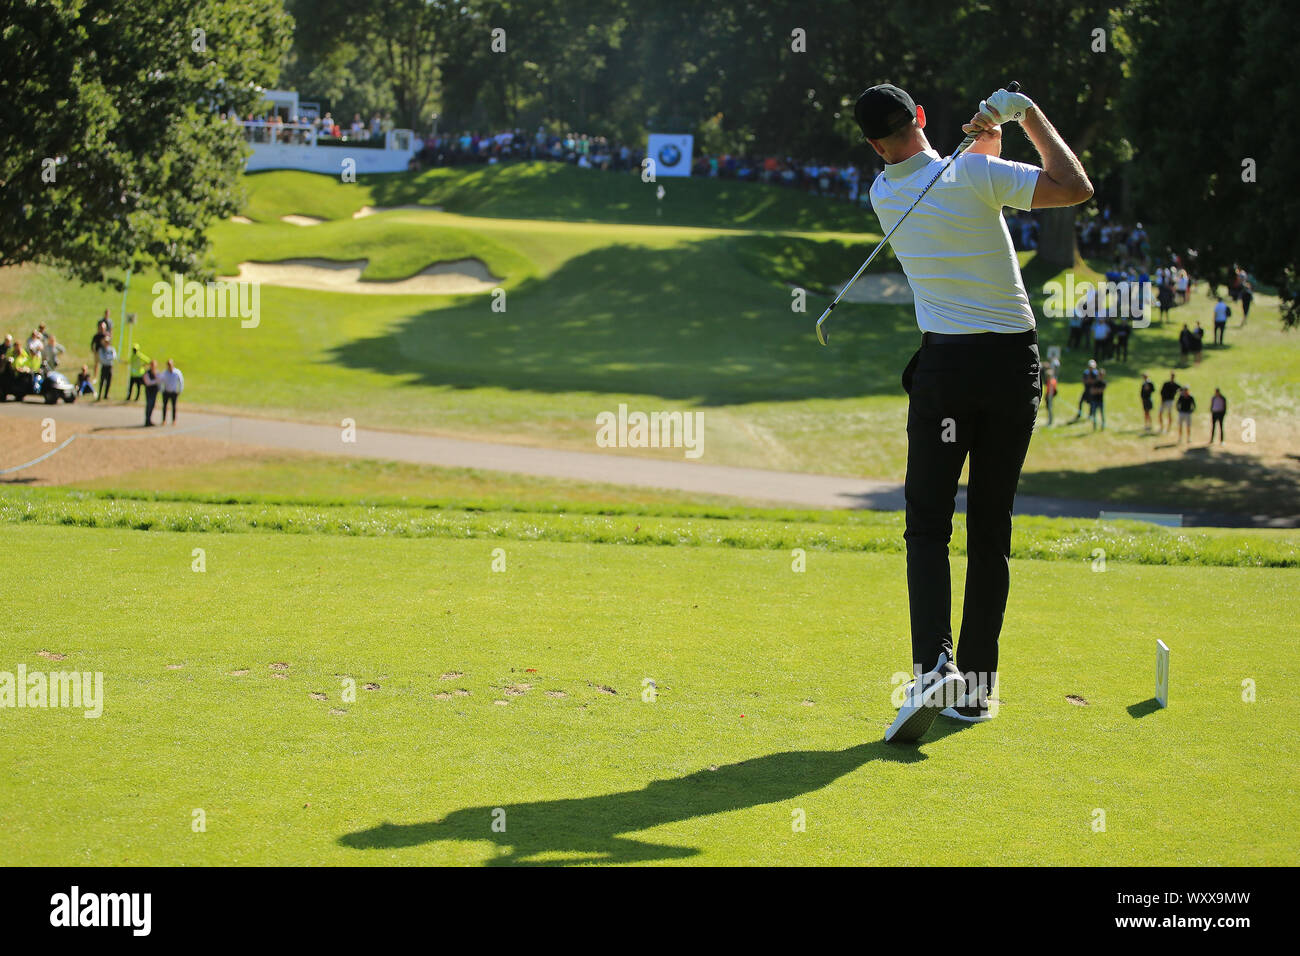 Virginia Water, UK. 18th Sep, 2019. England cricketer Stuart Broad competing in the ProAm of the BMW PGA Championship, European Tour Golf Tournament at Wentworth Golf Club, Virginia Water, Surrey, England. Credit: ESPA/Alamy Live News Stock Photo